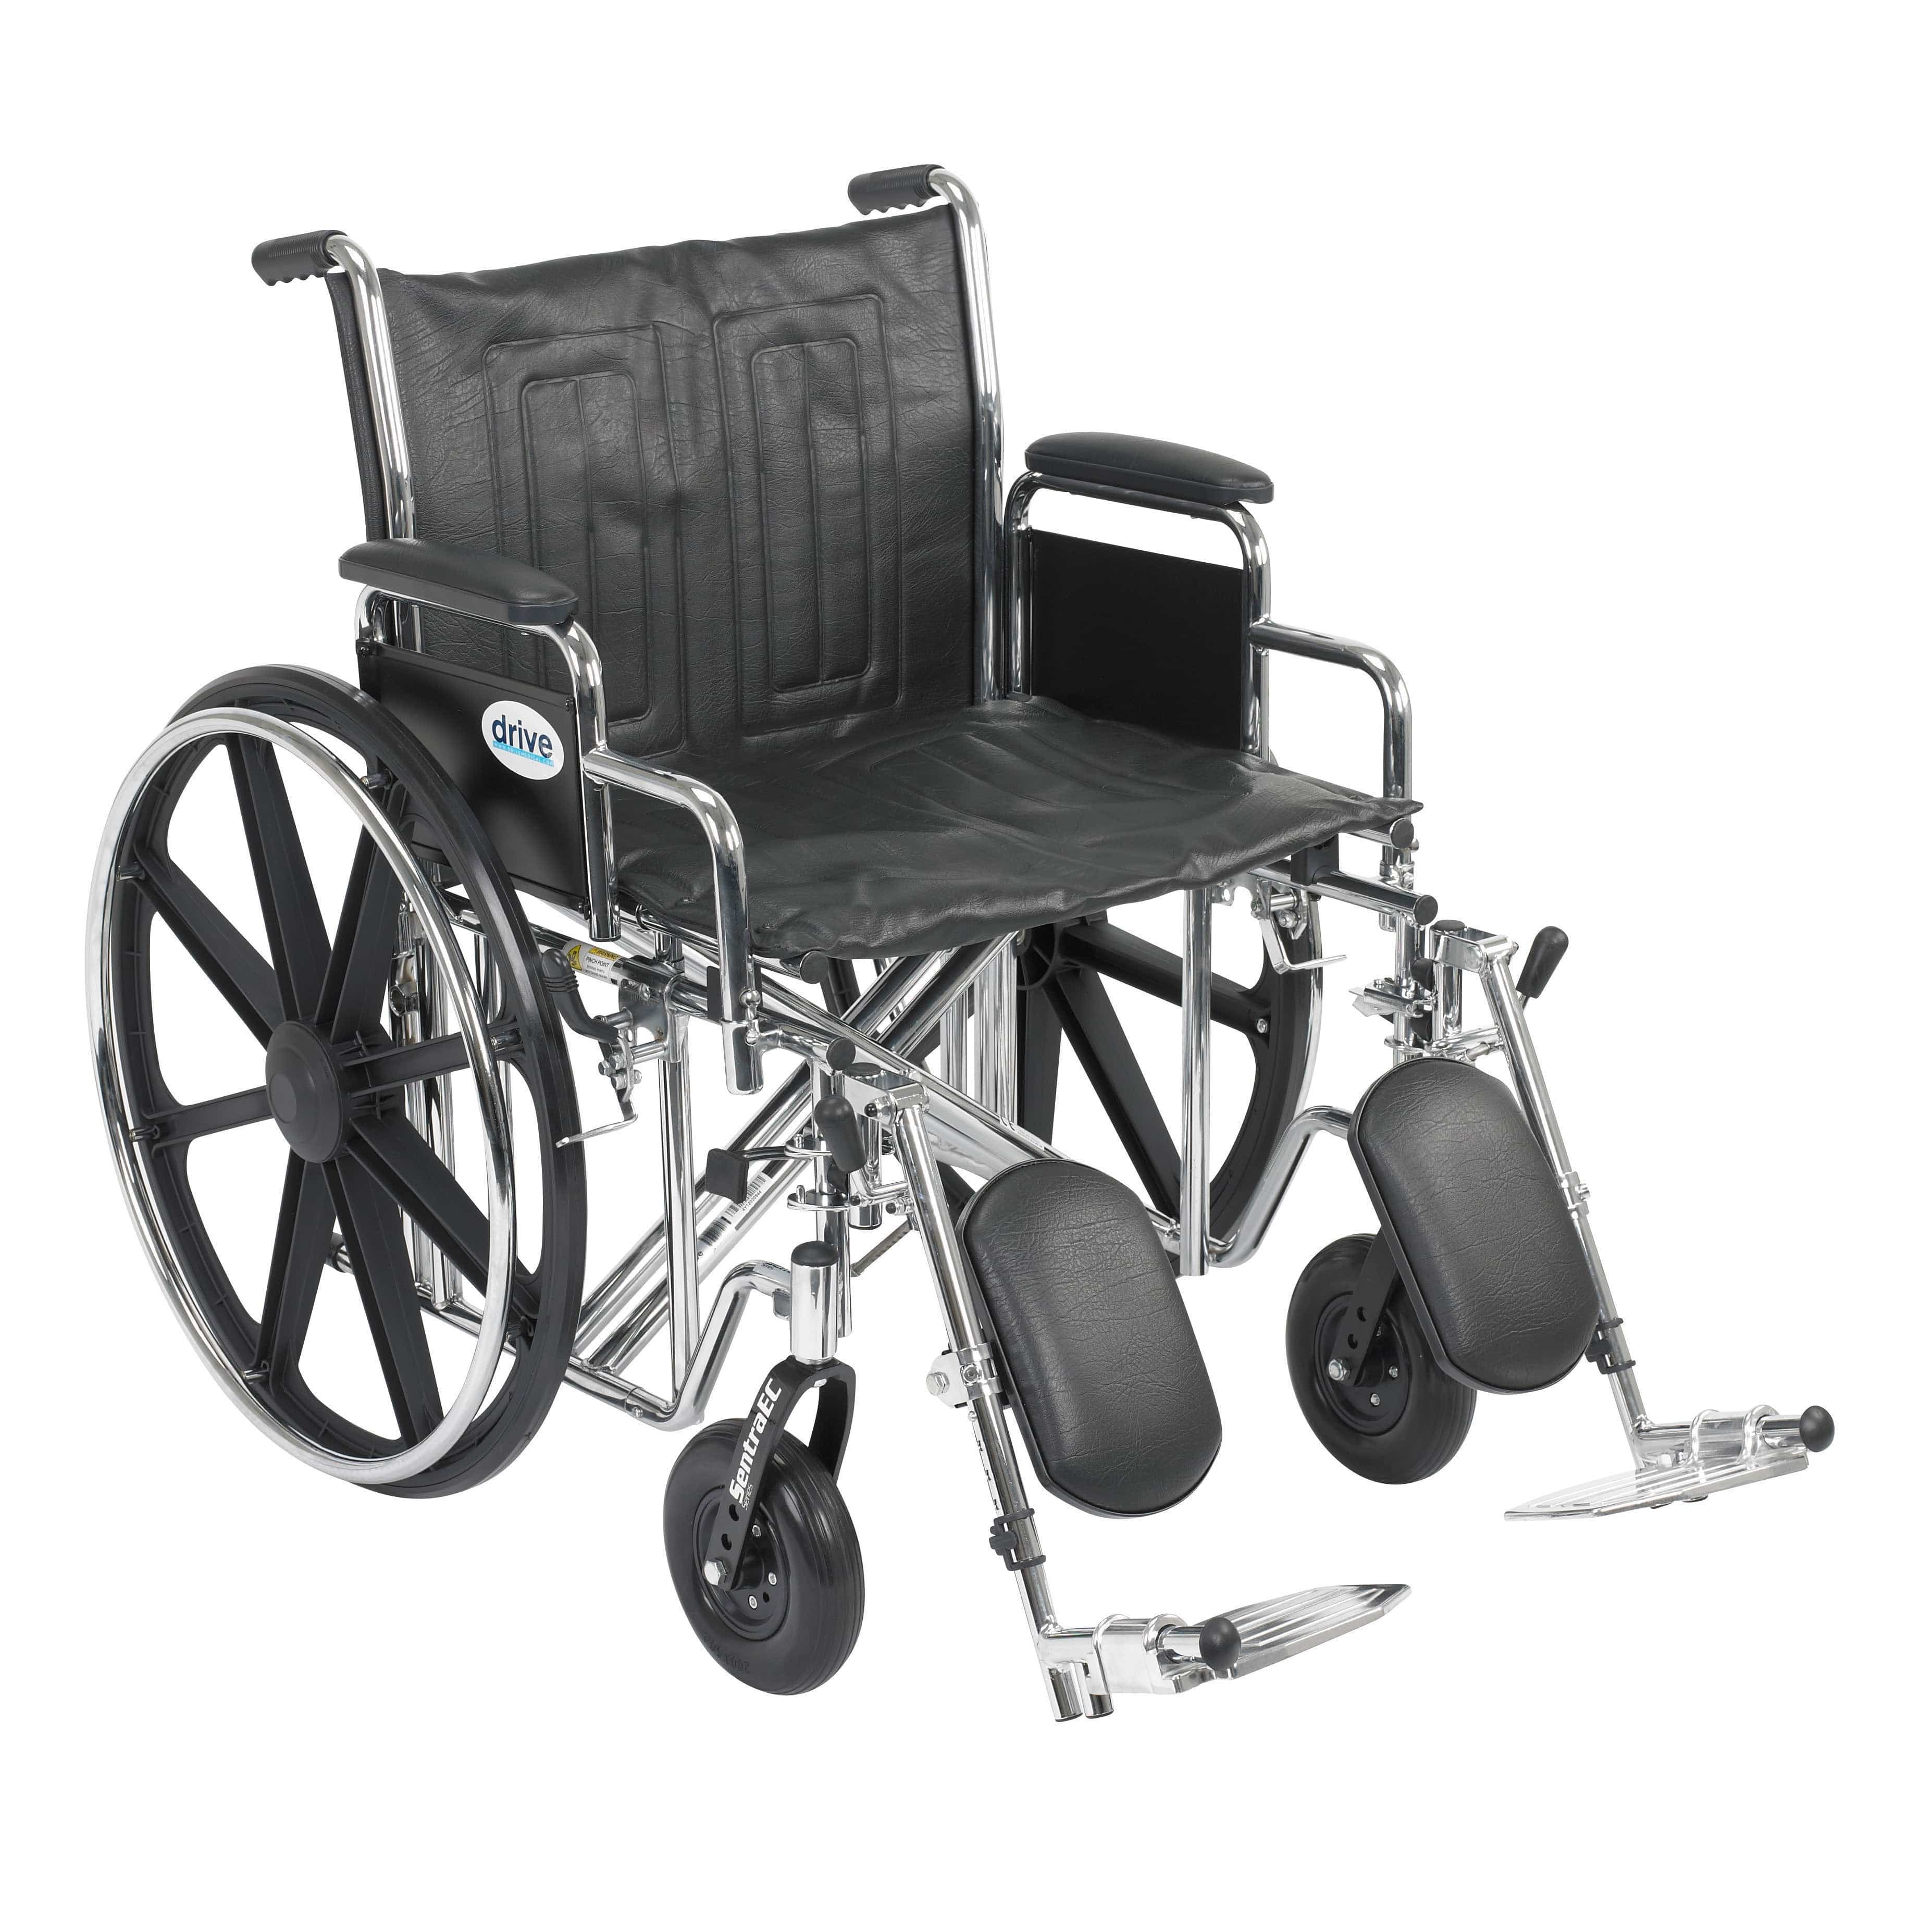 Drive Medical Wheelchairs Detachable Desk Arms and Elevating Leg Rests / 22" Seat Drive Medical Sentra EC Heavy Duty Wheelchair